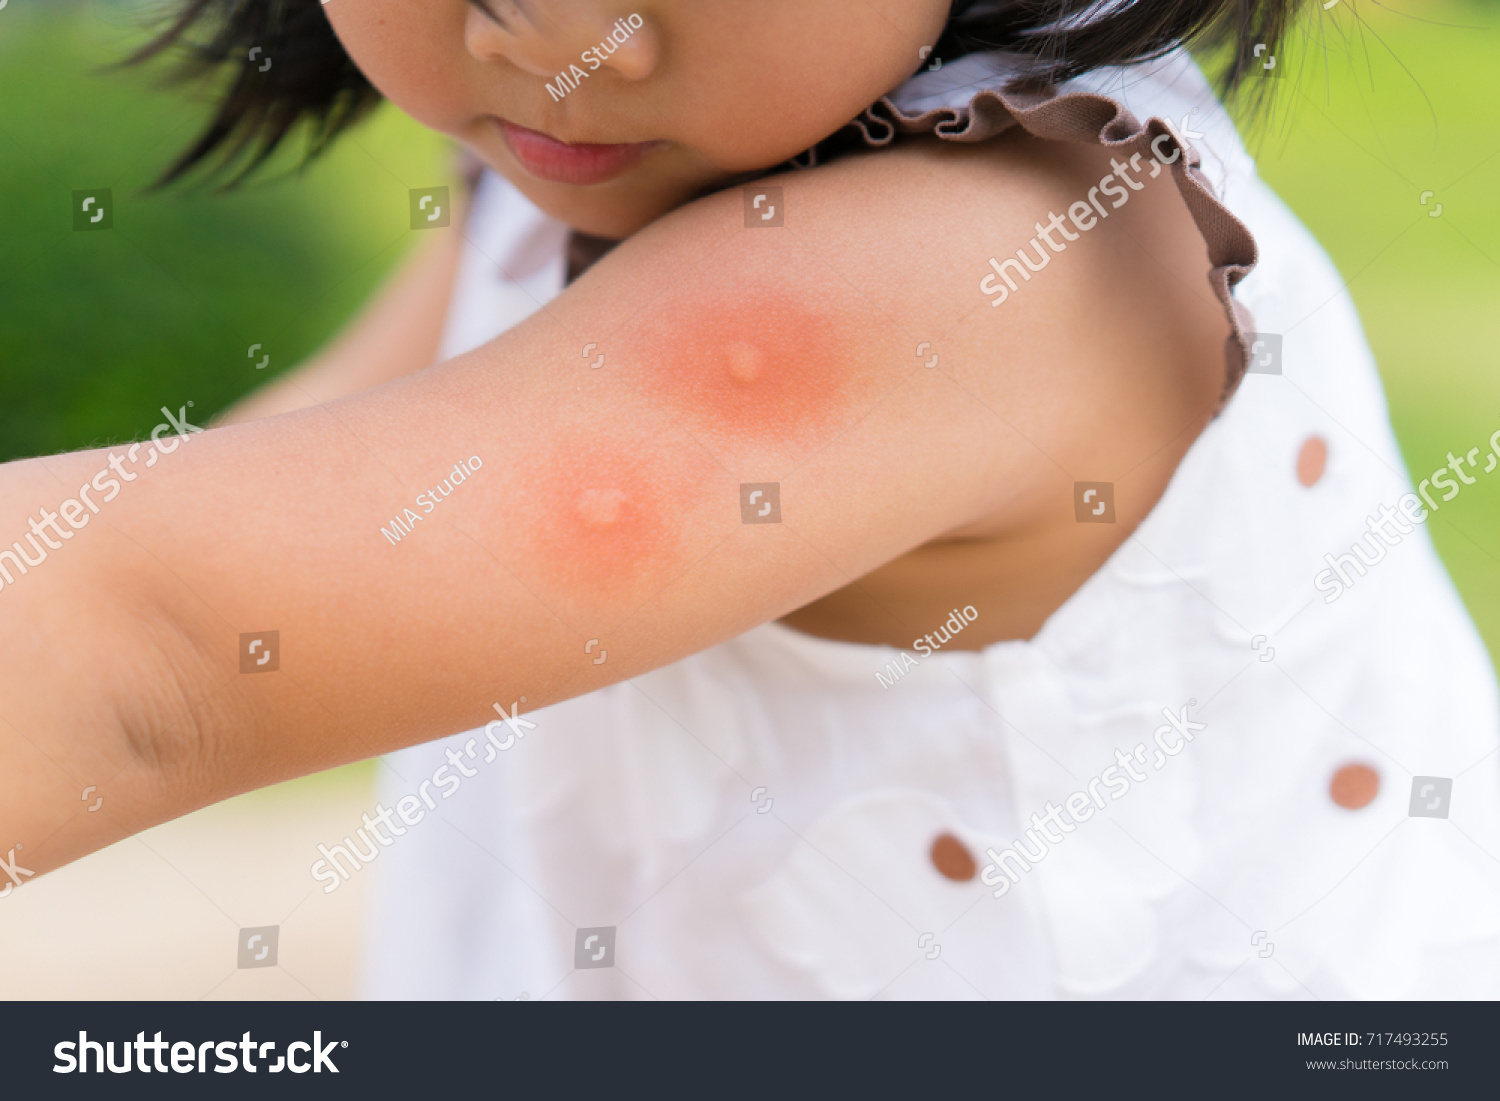 Little girl has allergies with mosquitoes bite and itching her arm.Mosquito blood breeding on kids.Repellent, Dengue virus, Yellow fever, West nile, Malaria, Diseases Spread by Mosquitoes concept. #717493255